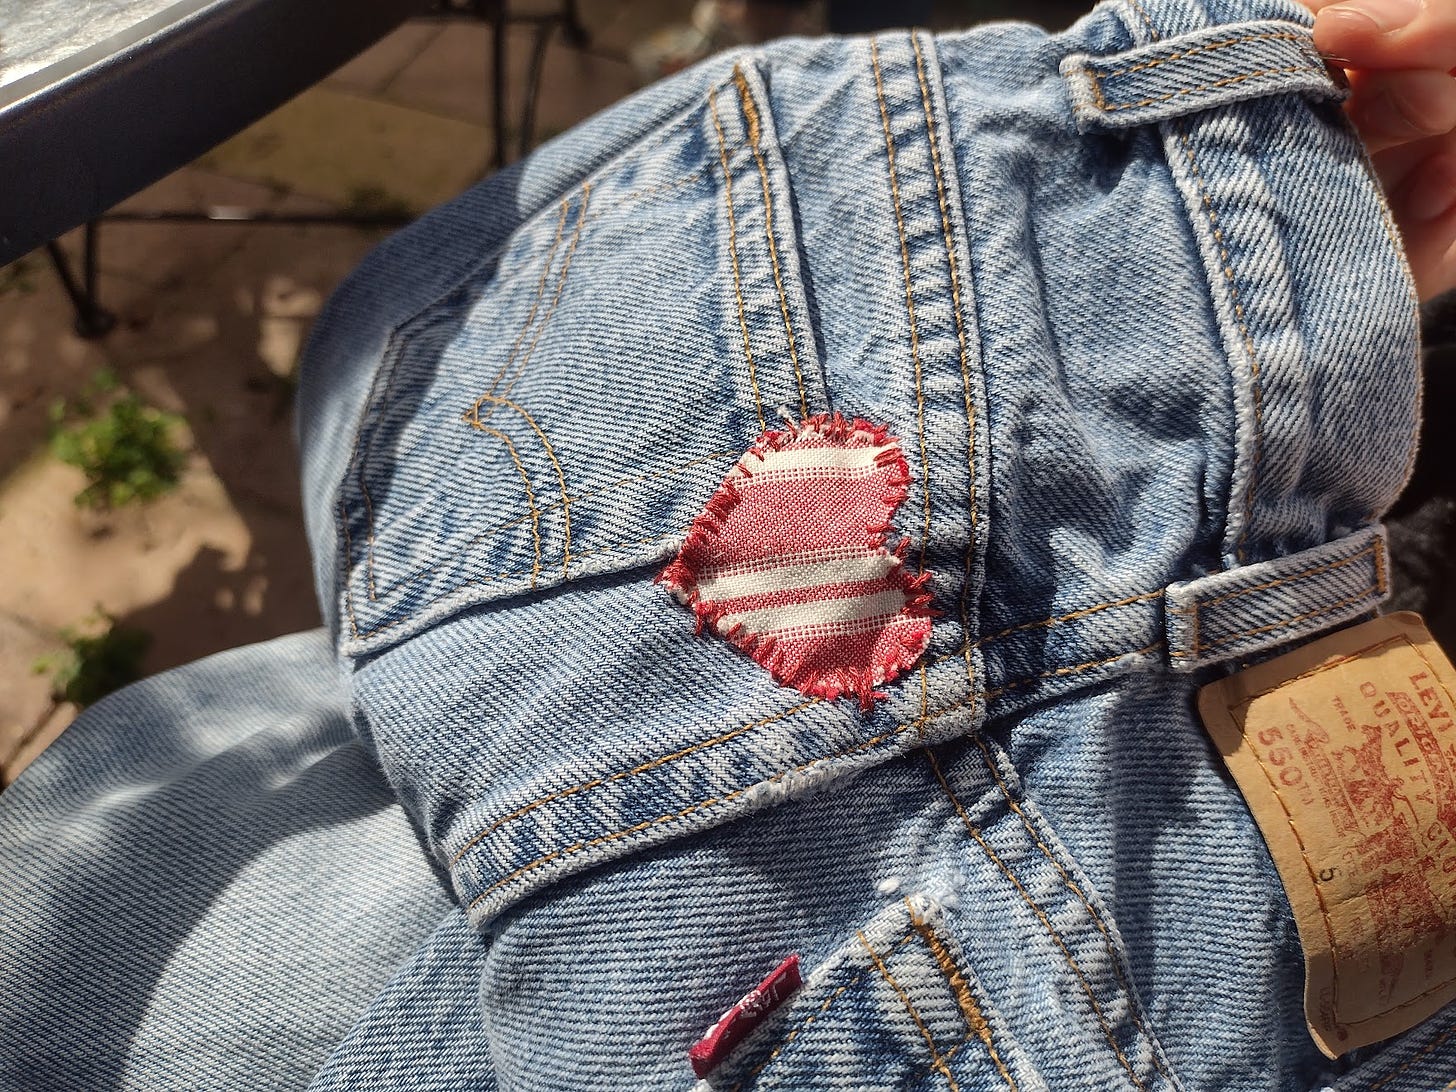 Faded jeans with a red and white heart shaped patch sewn over the top corner of a back pocket.